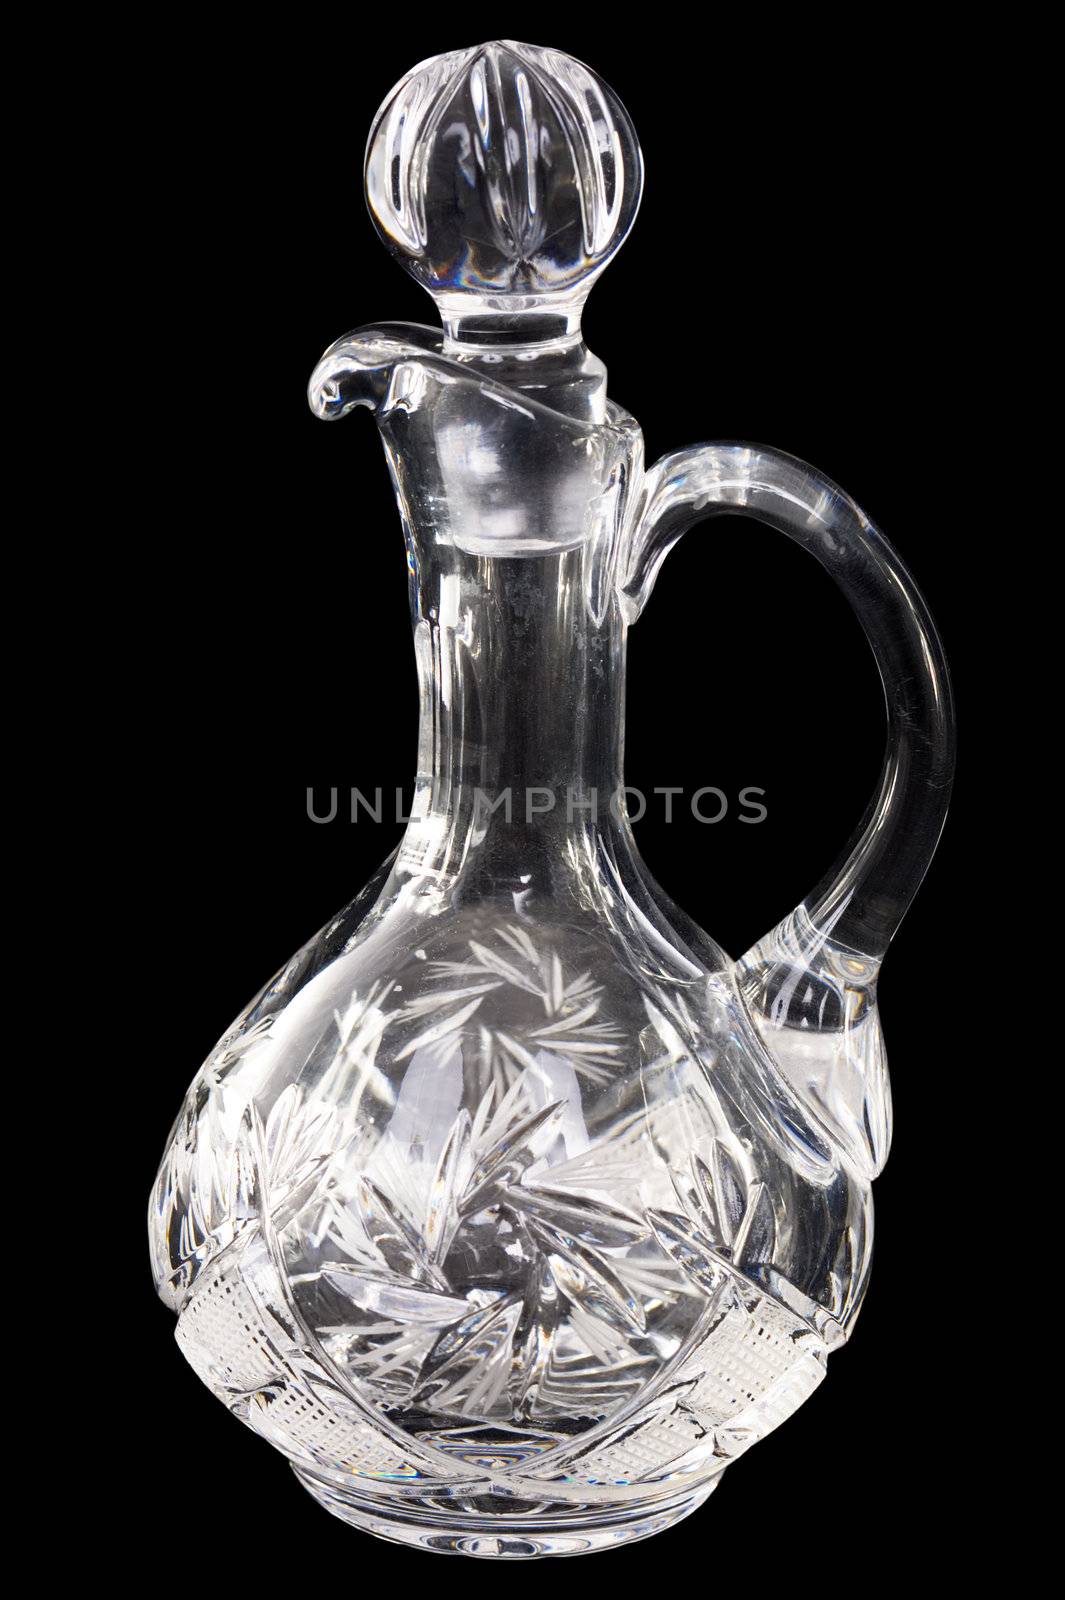 Glass empty carafe with stopper on the black background